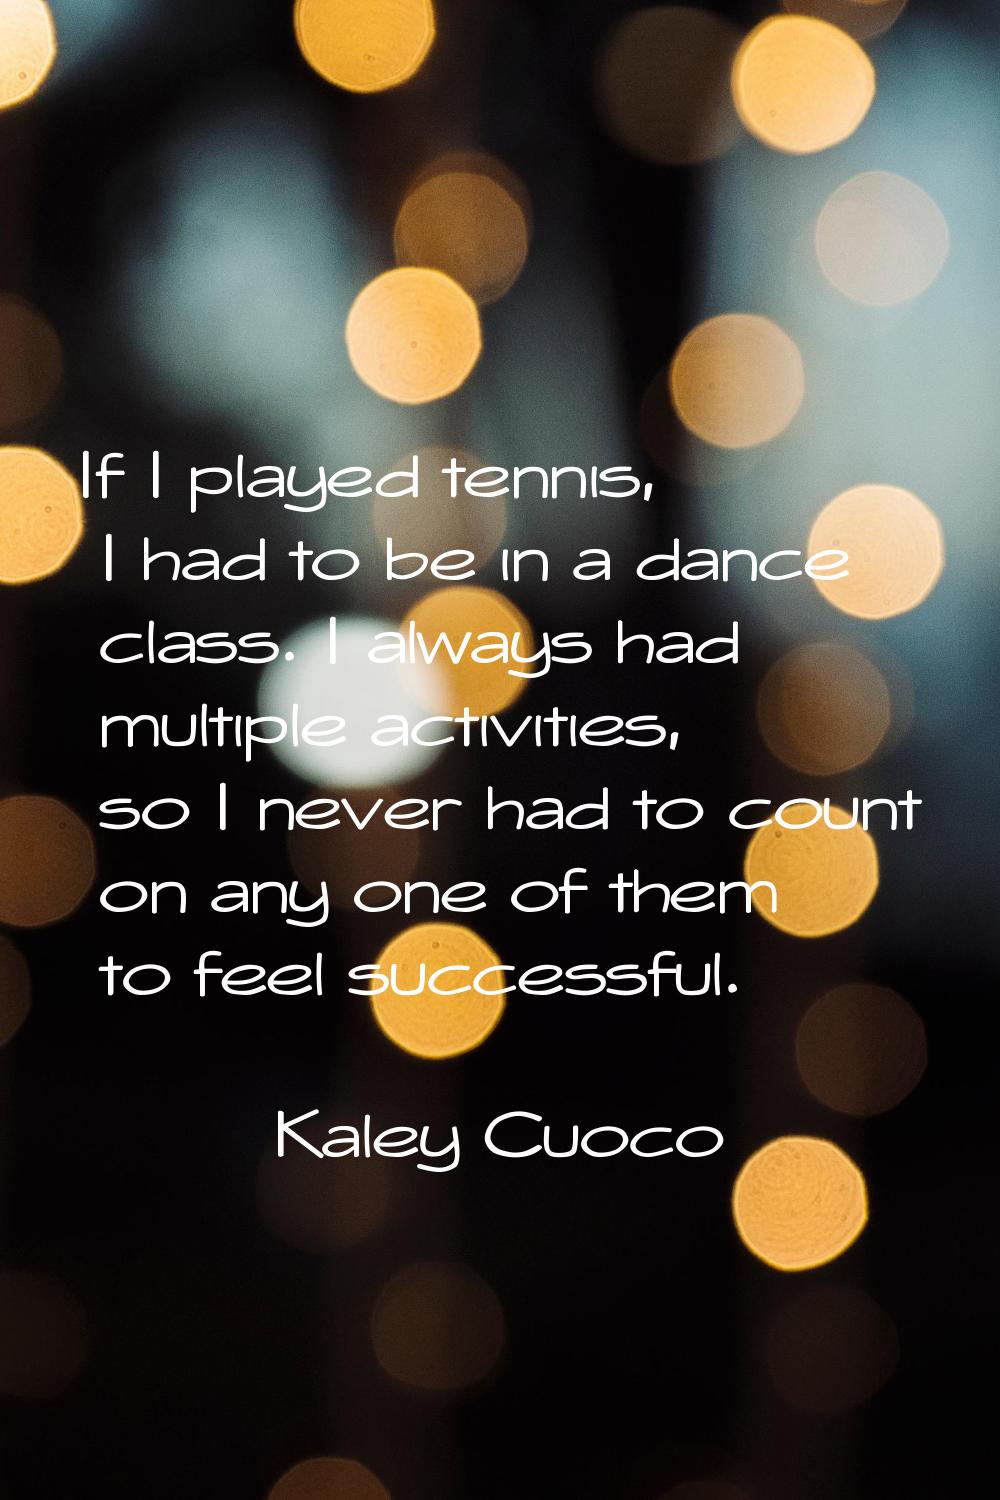 If I played tennis, I had to be in a dance class. I always had multiple activities, so I never had 